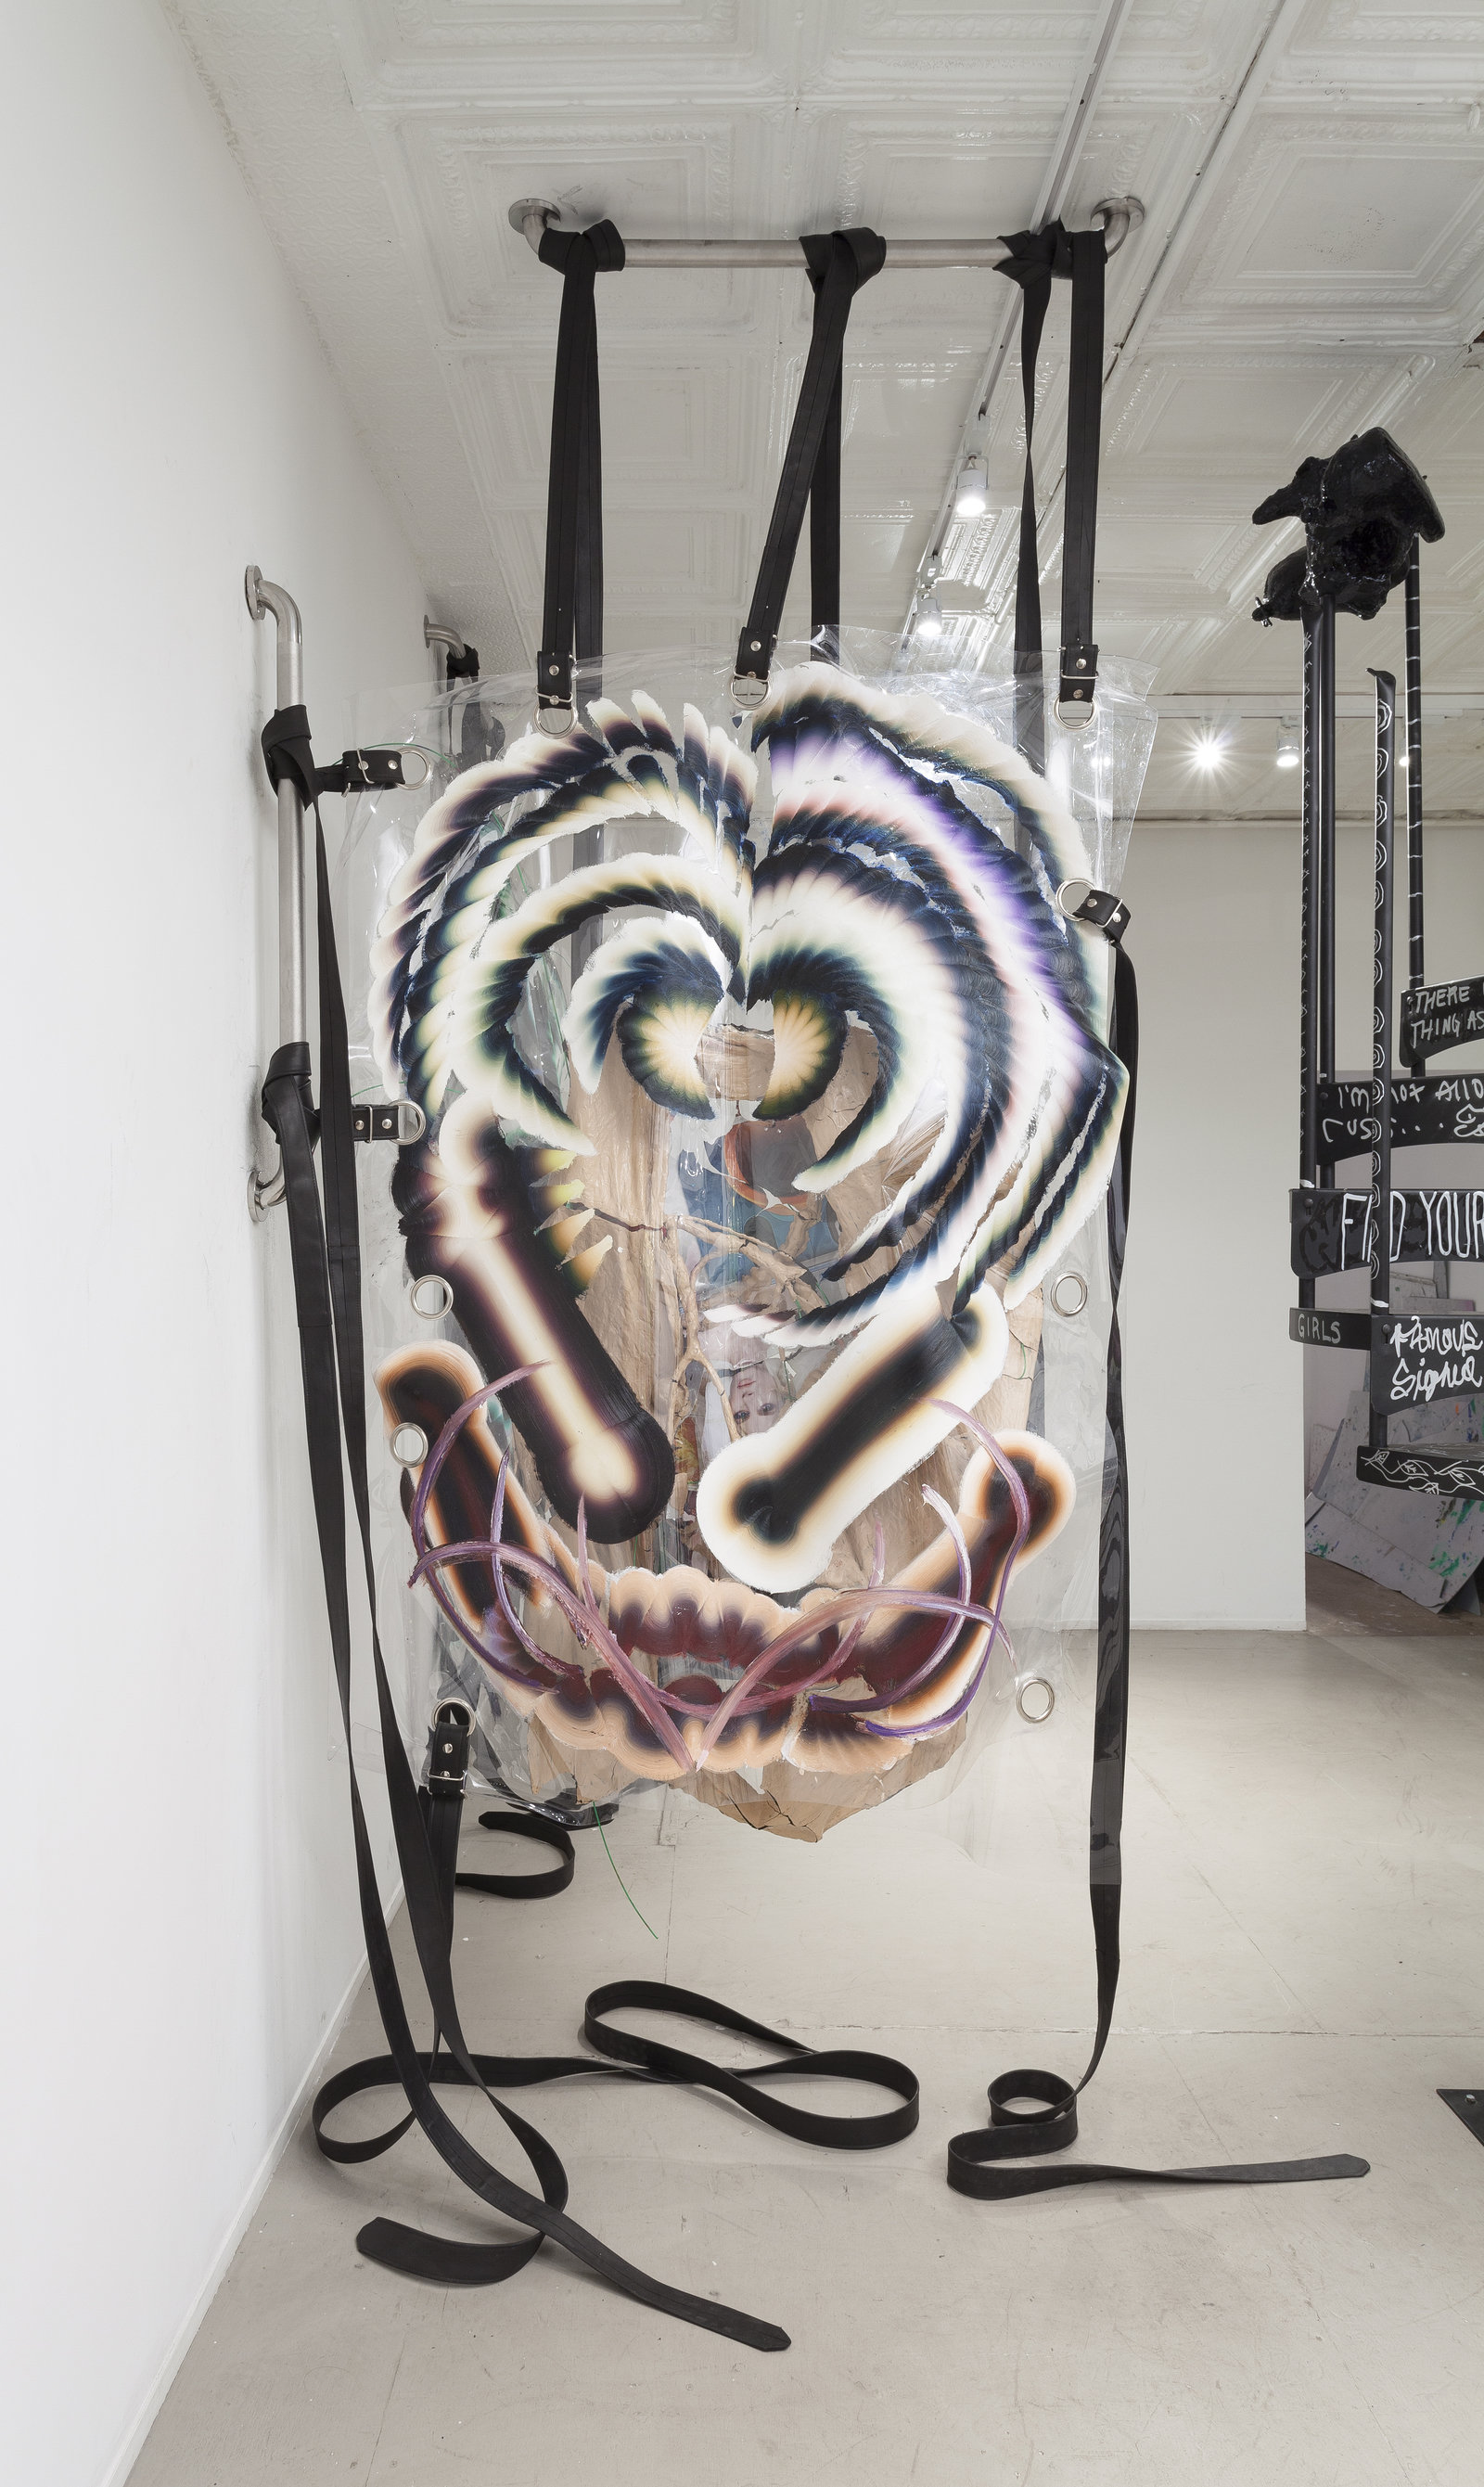 Kerstin Brätsch and Debo Eilers S is for Sound, 2013, Bodybag Liberato, installation view KAYA III, 47 Canal